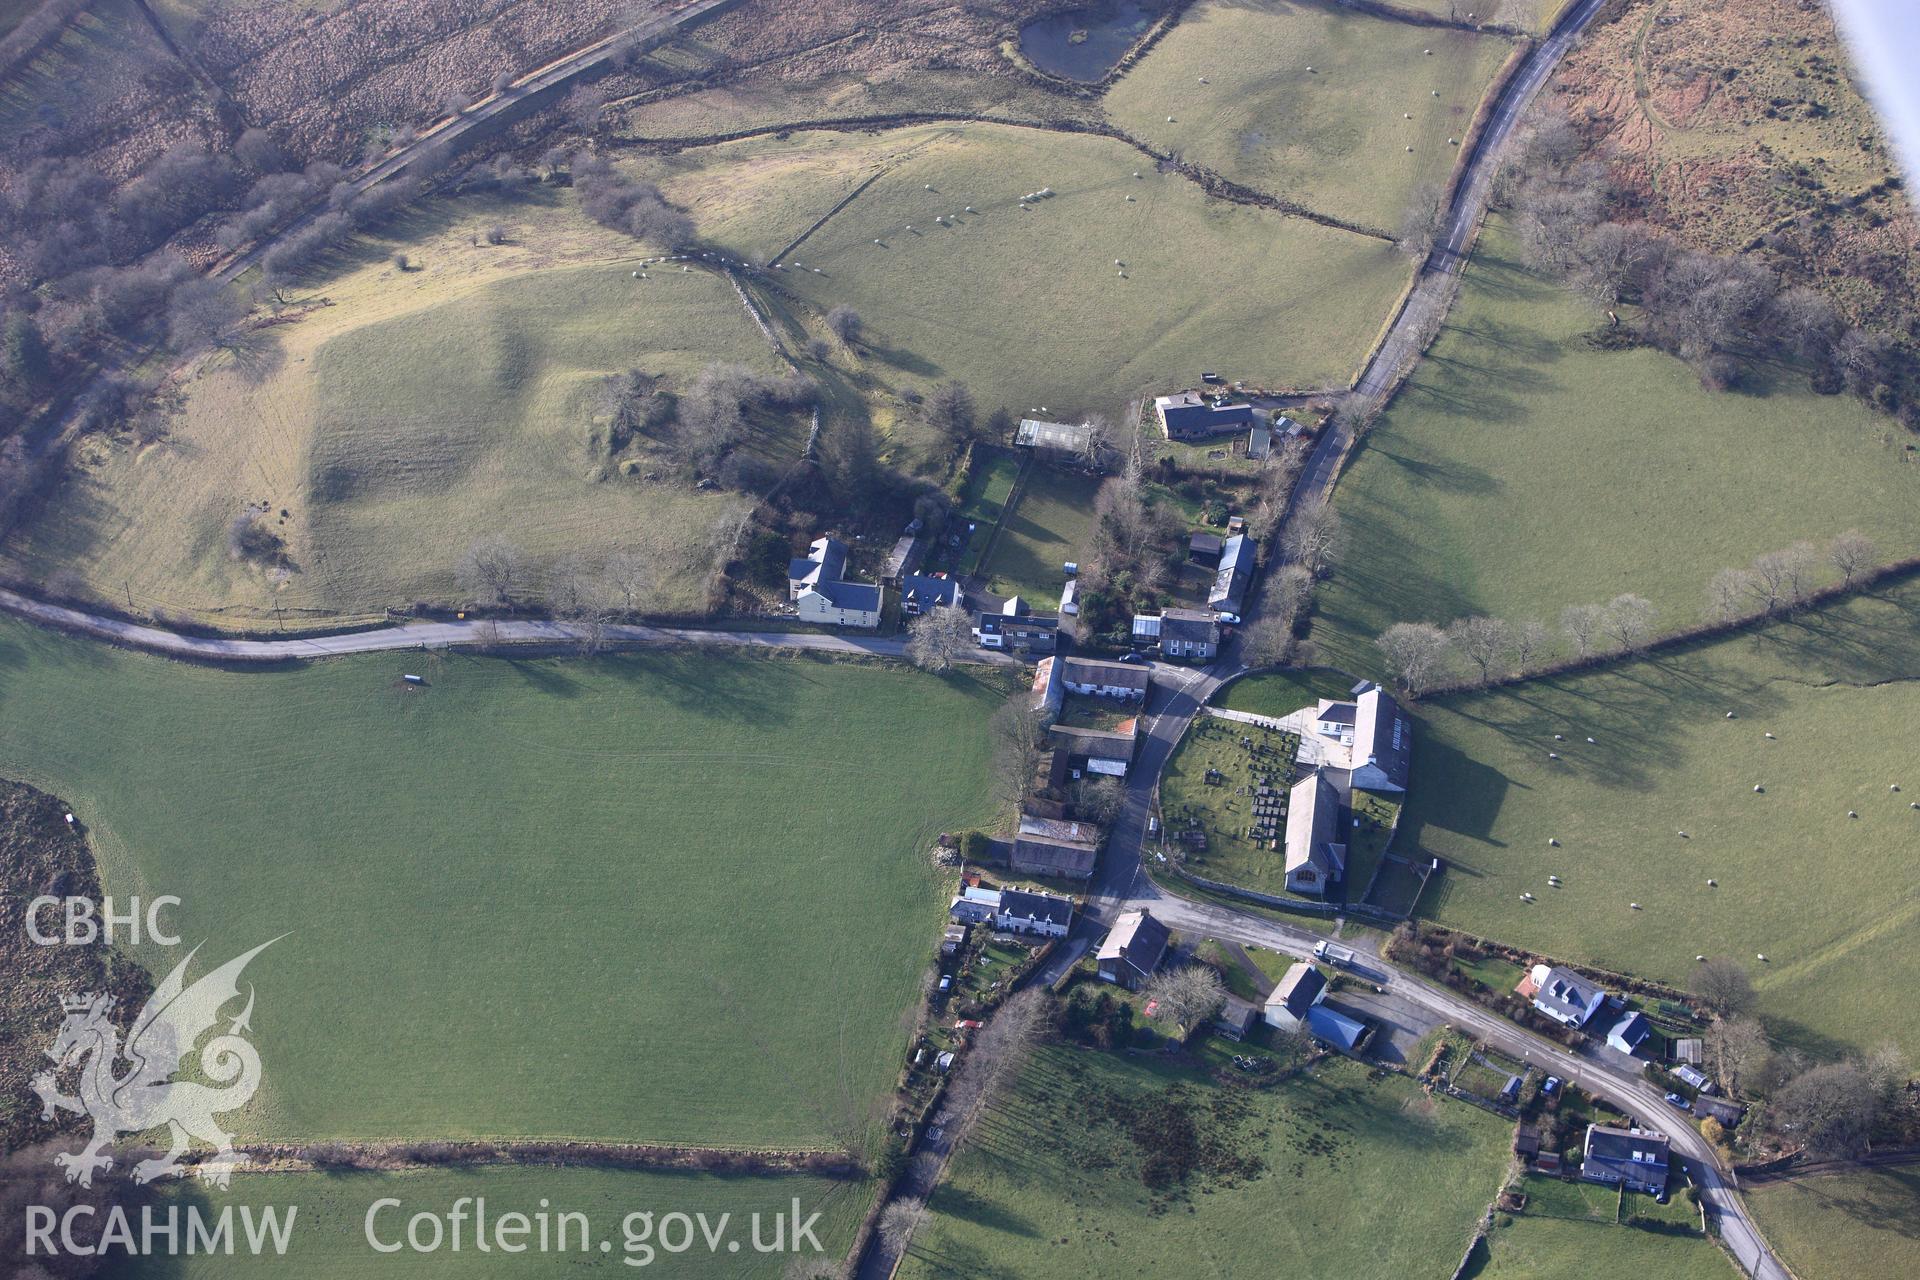 RCAHMW colour oblique photograph of Ystrad Meurig Village. Taken by Toby Driver on 07/02/2012.